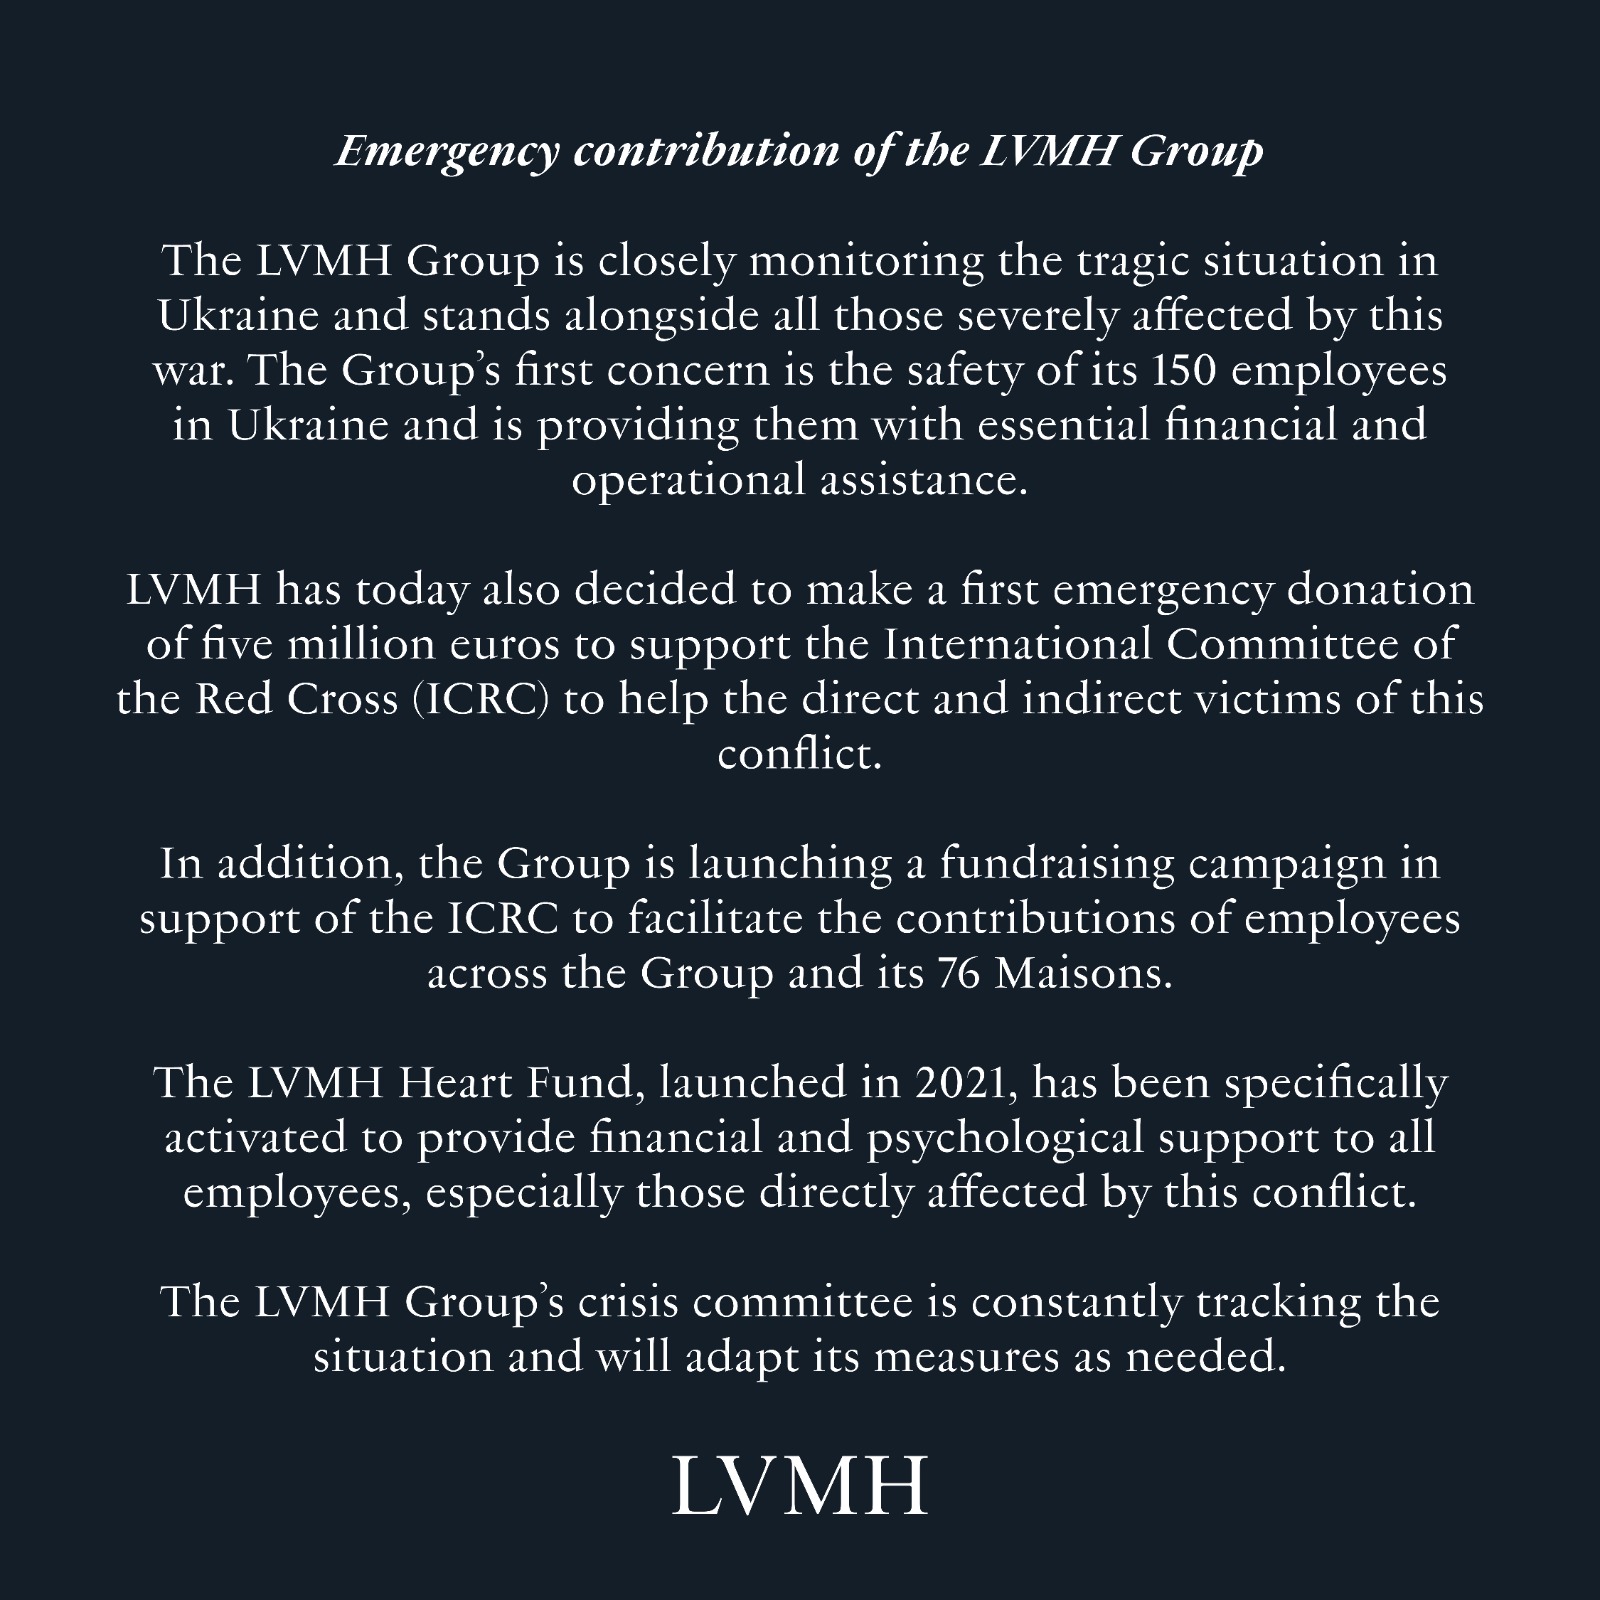 LVMH on X: The LVMH Group stands alongside all those severely affected by  the war in Ukraine. The Group's first concern is the safety of its 150  employees in the country. LVMH